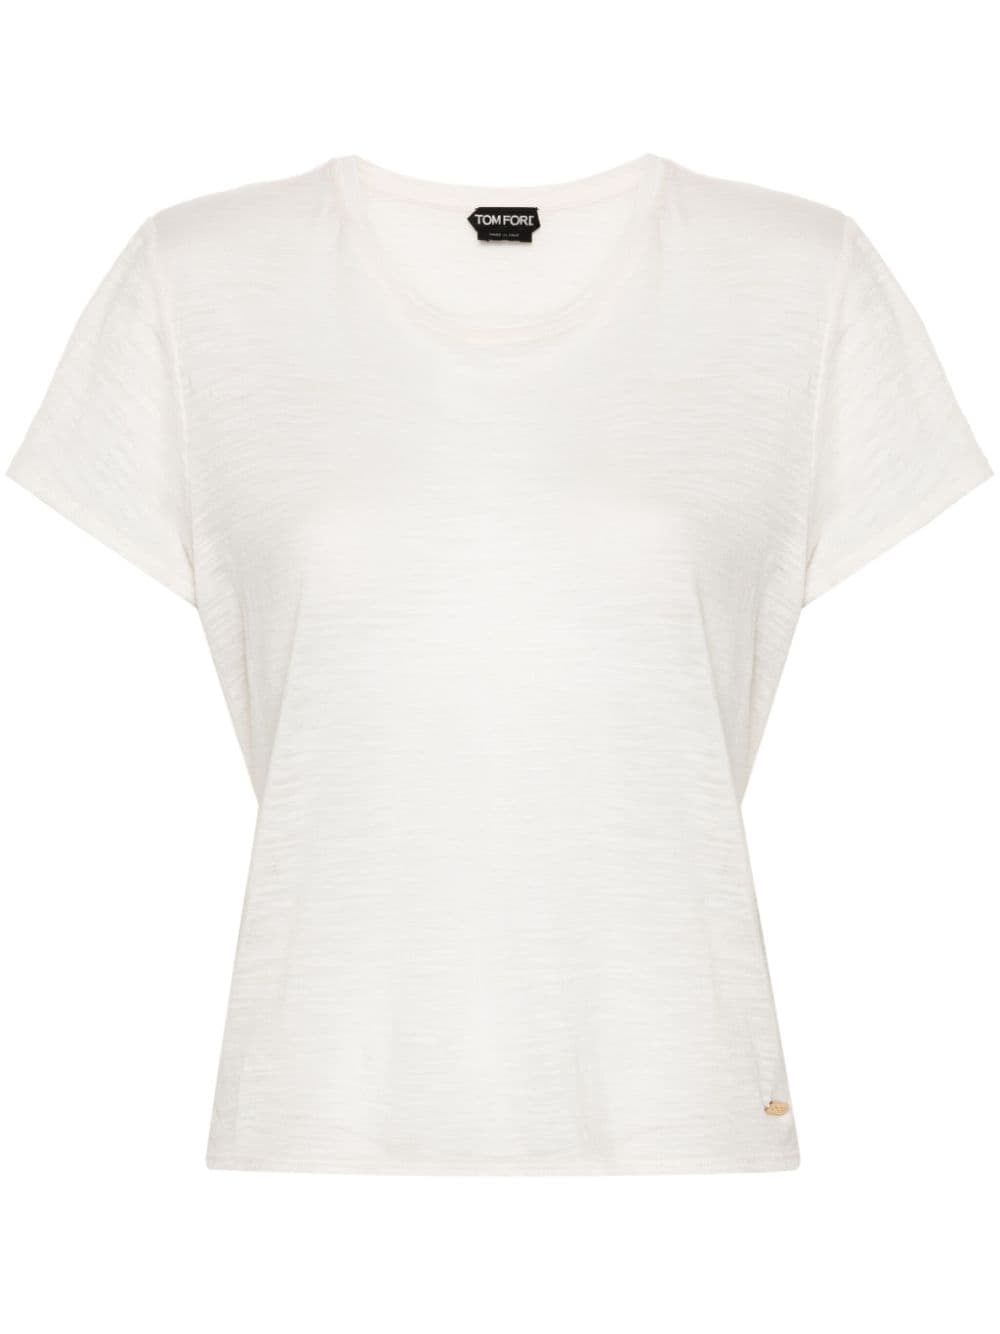 TOM FORD Jersey T-shirt Beige